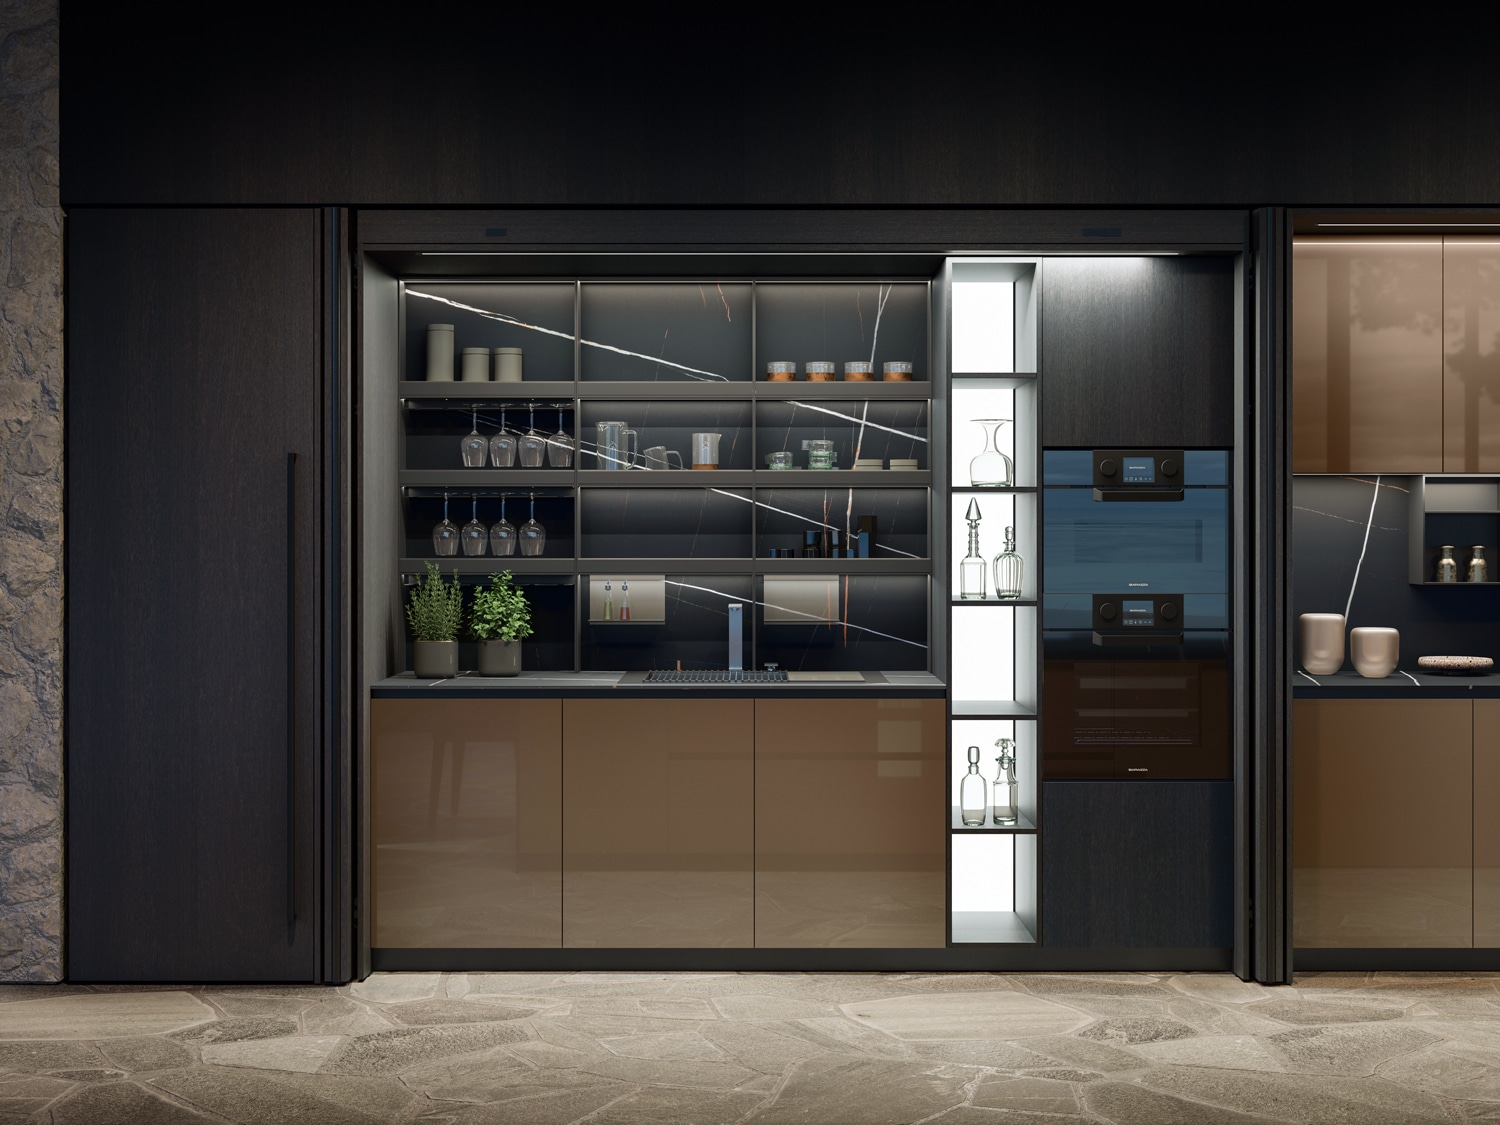 The Hide system can also house integrated appliances. The bifolding pocket doors disappear into the sides allowing full access to the unit.